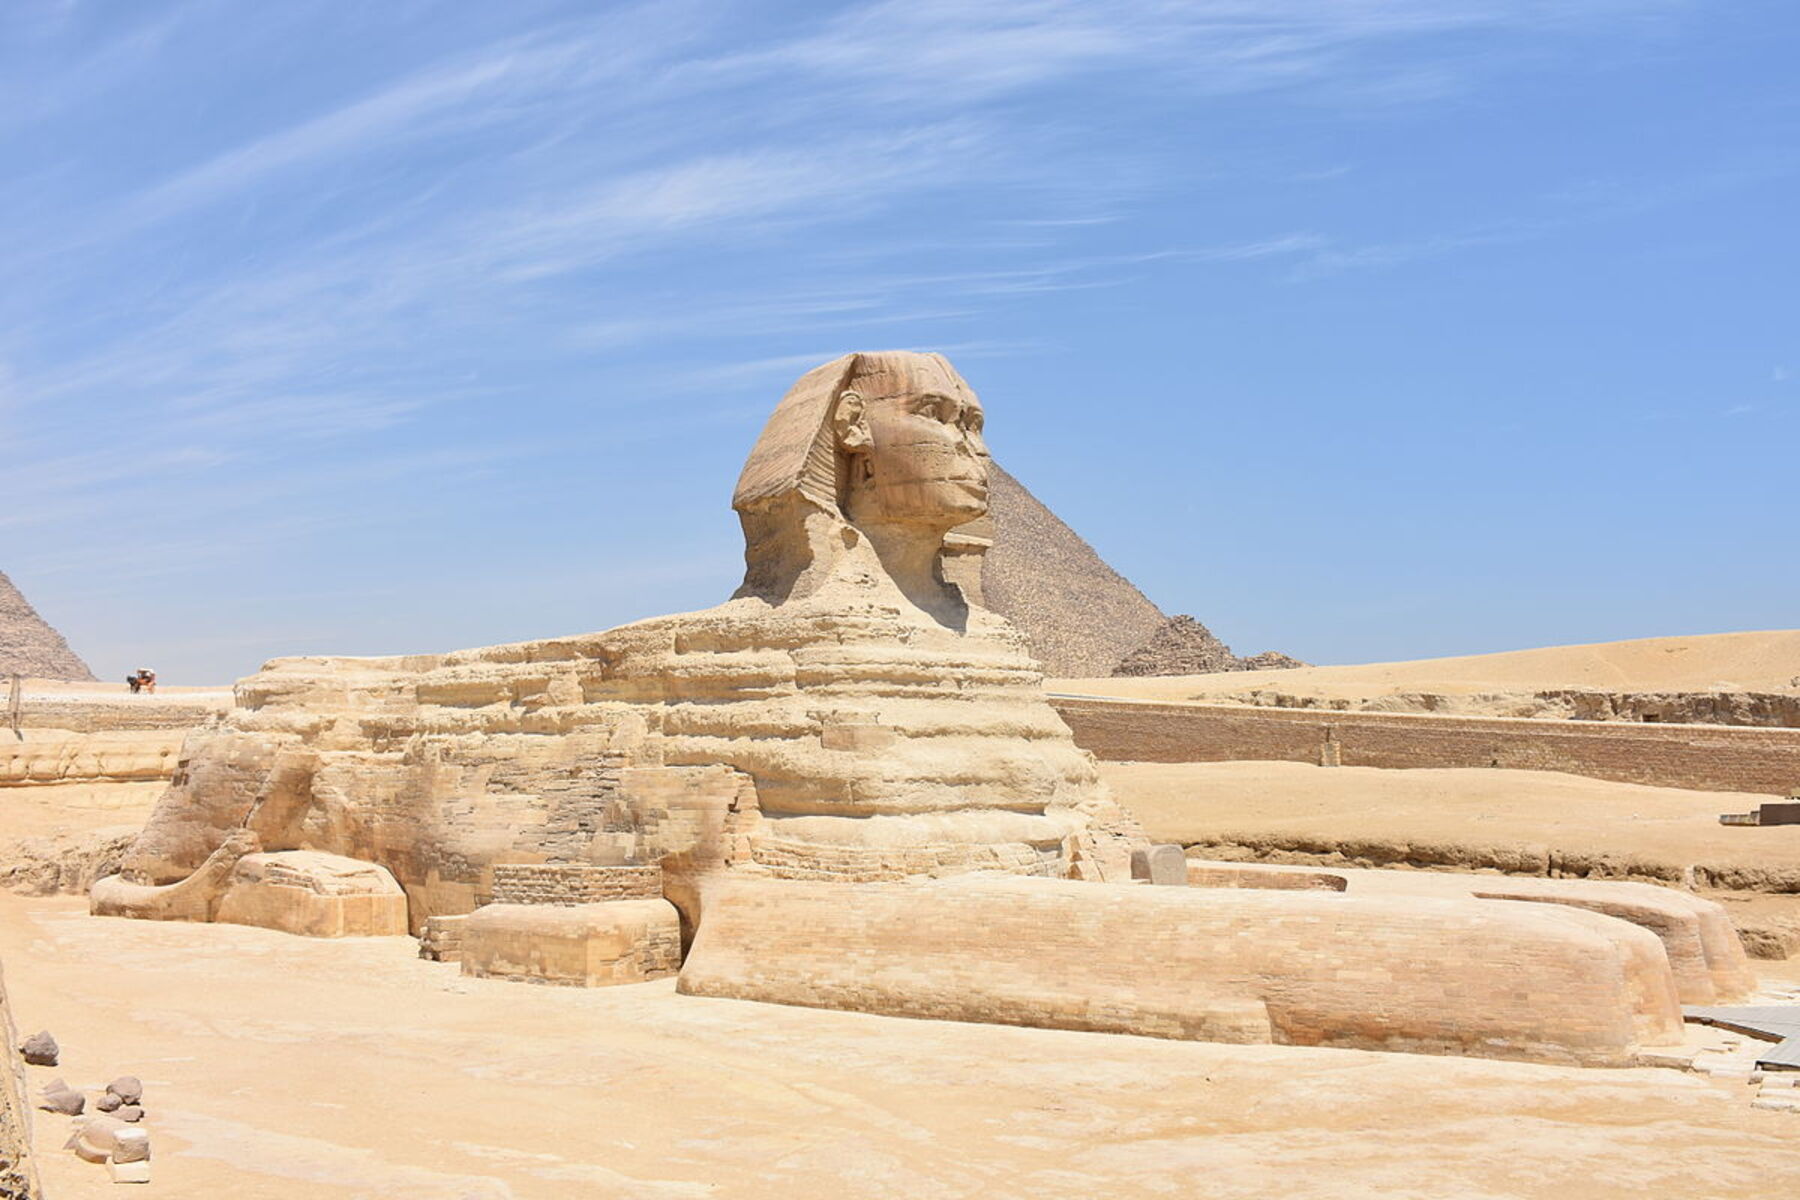 What Is The Oldest Known Monumental Sculpture In Egypt?